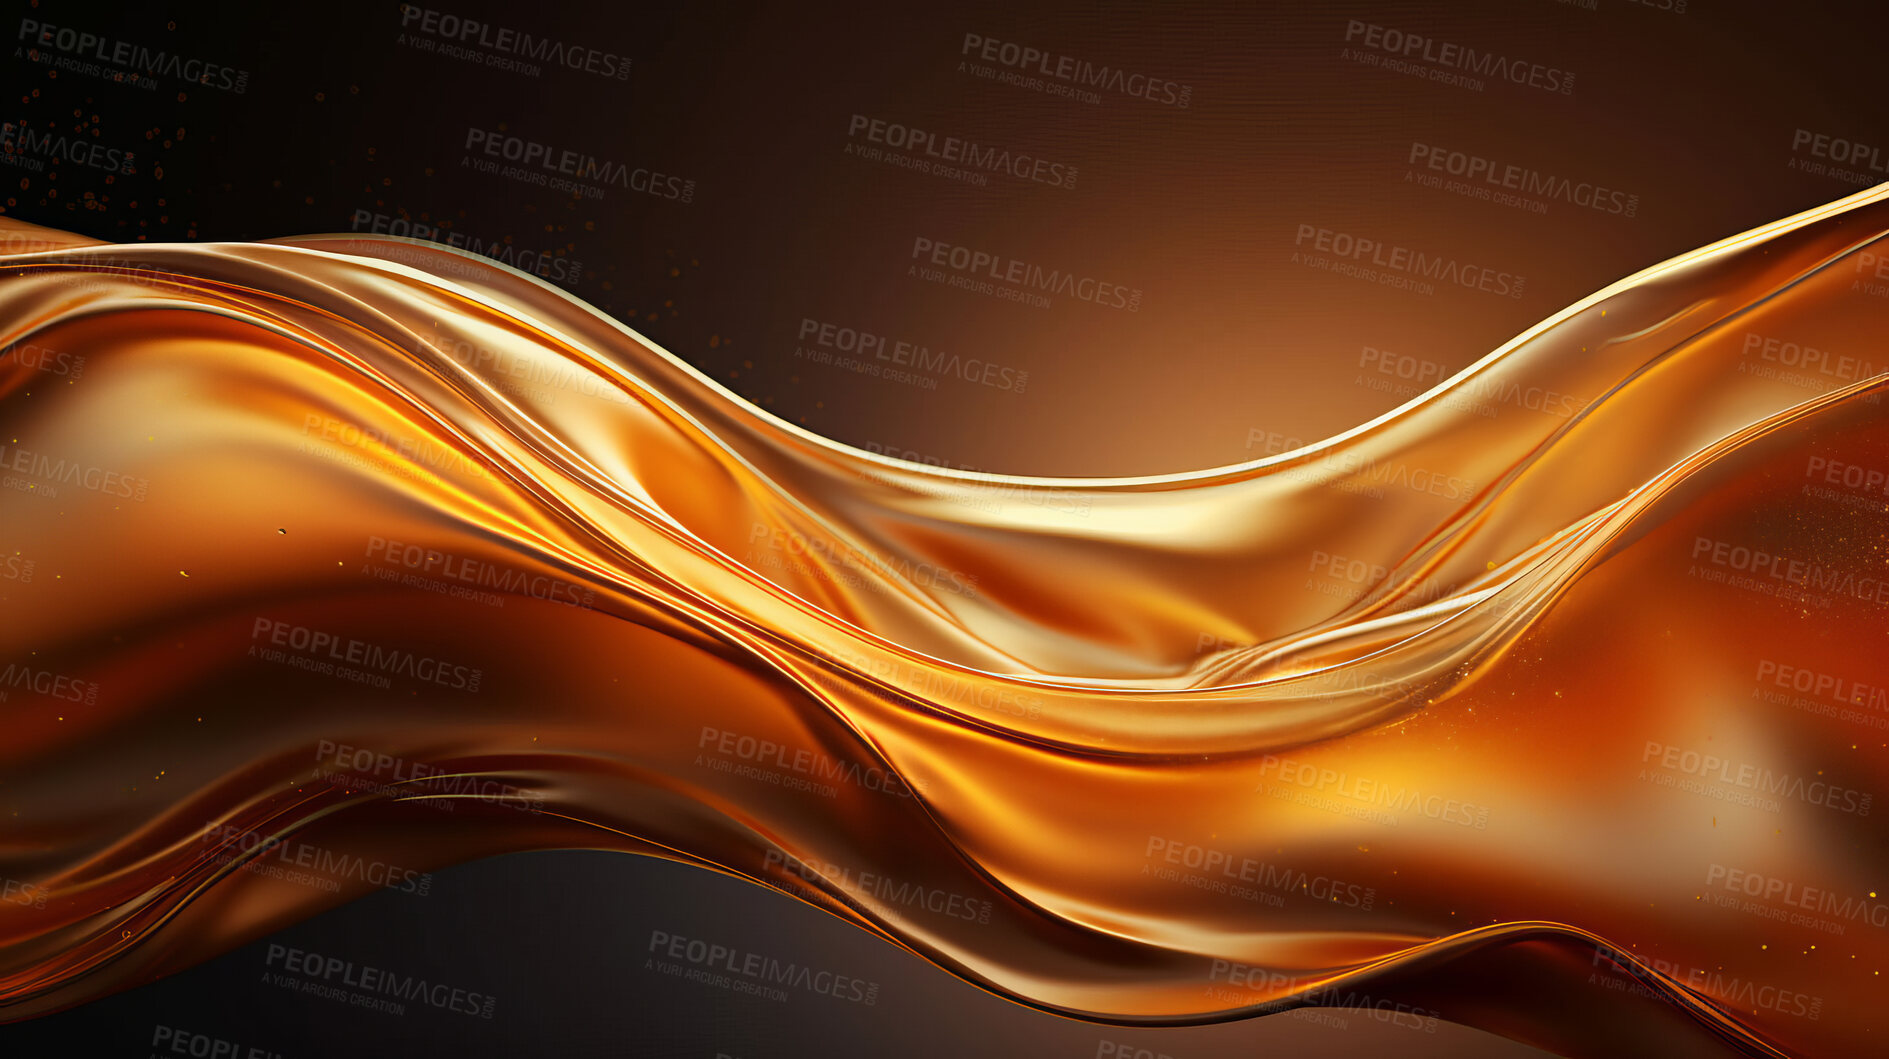 Buy stock photo Abstract, luxury cloth or liquid wave background, wavy folds of grunge silk texture, satin velvet material or luxurious paint background. Elegant wallpaper design, dynamic movement and flow.